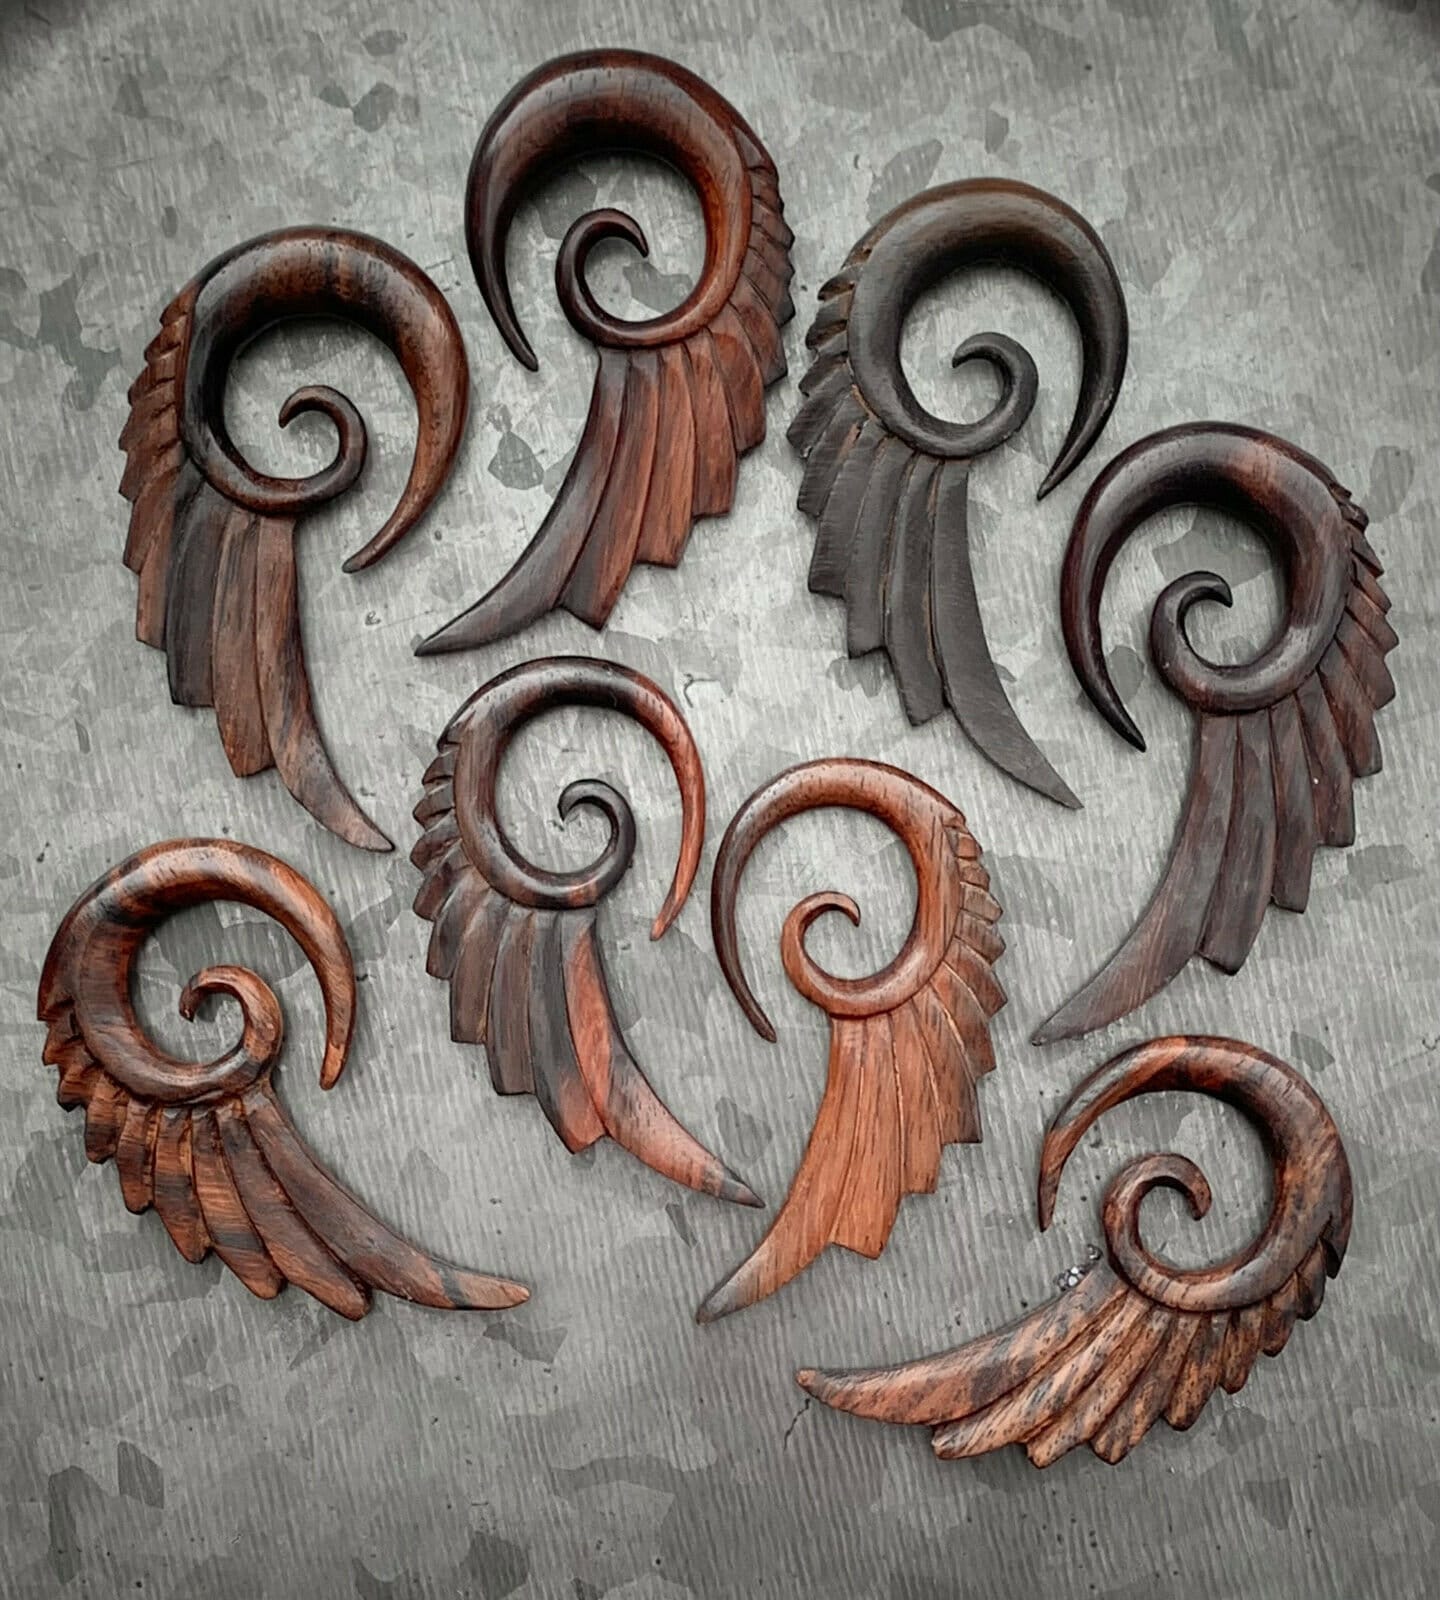 PAIR of Beautiful Hand Carved Organic Sono Wood Angel Wings Tapers/Plugs - Expanders - Gauges 4g (5mm) thru 00g (10mm) available!